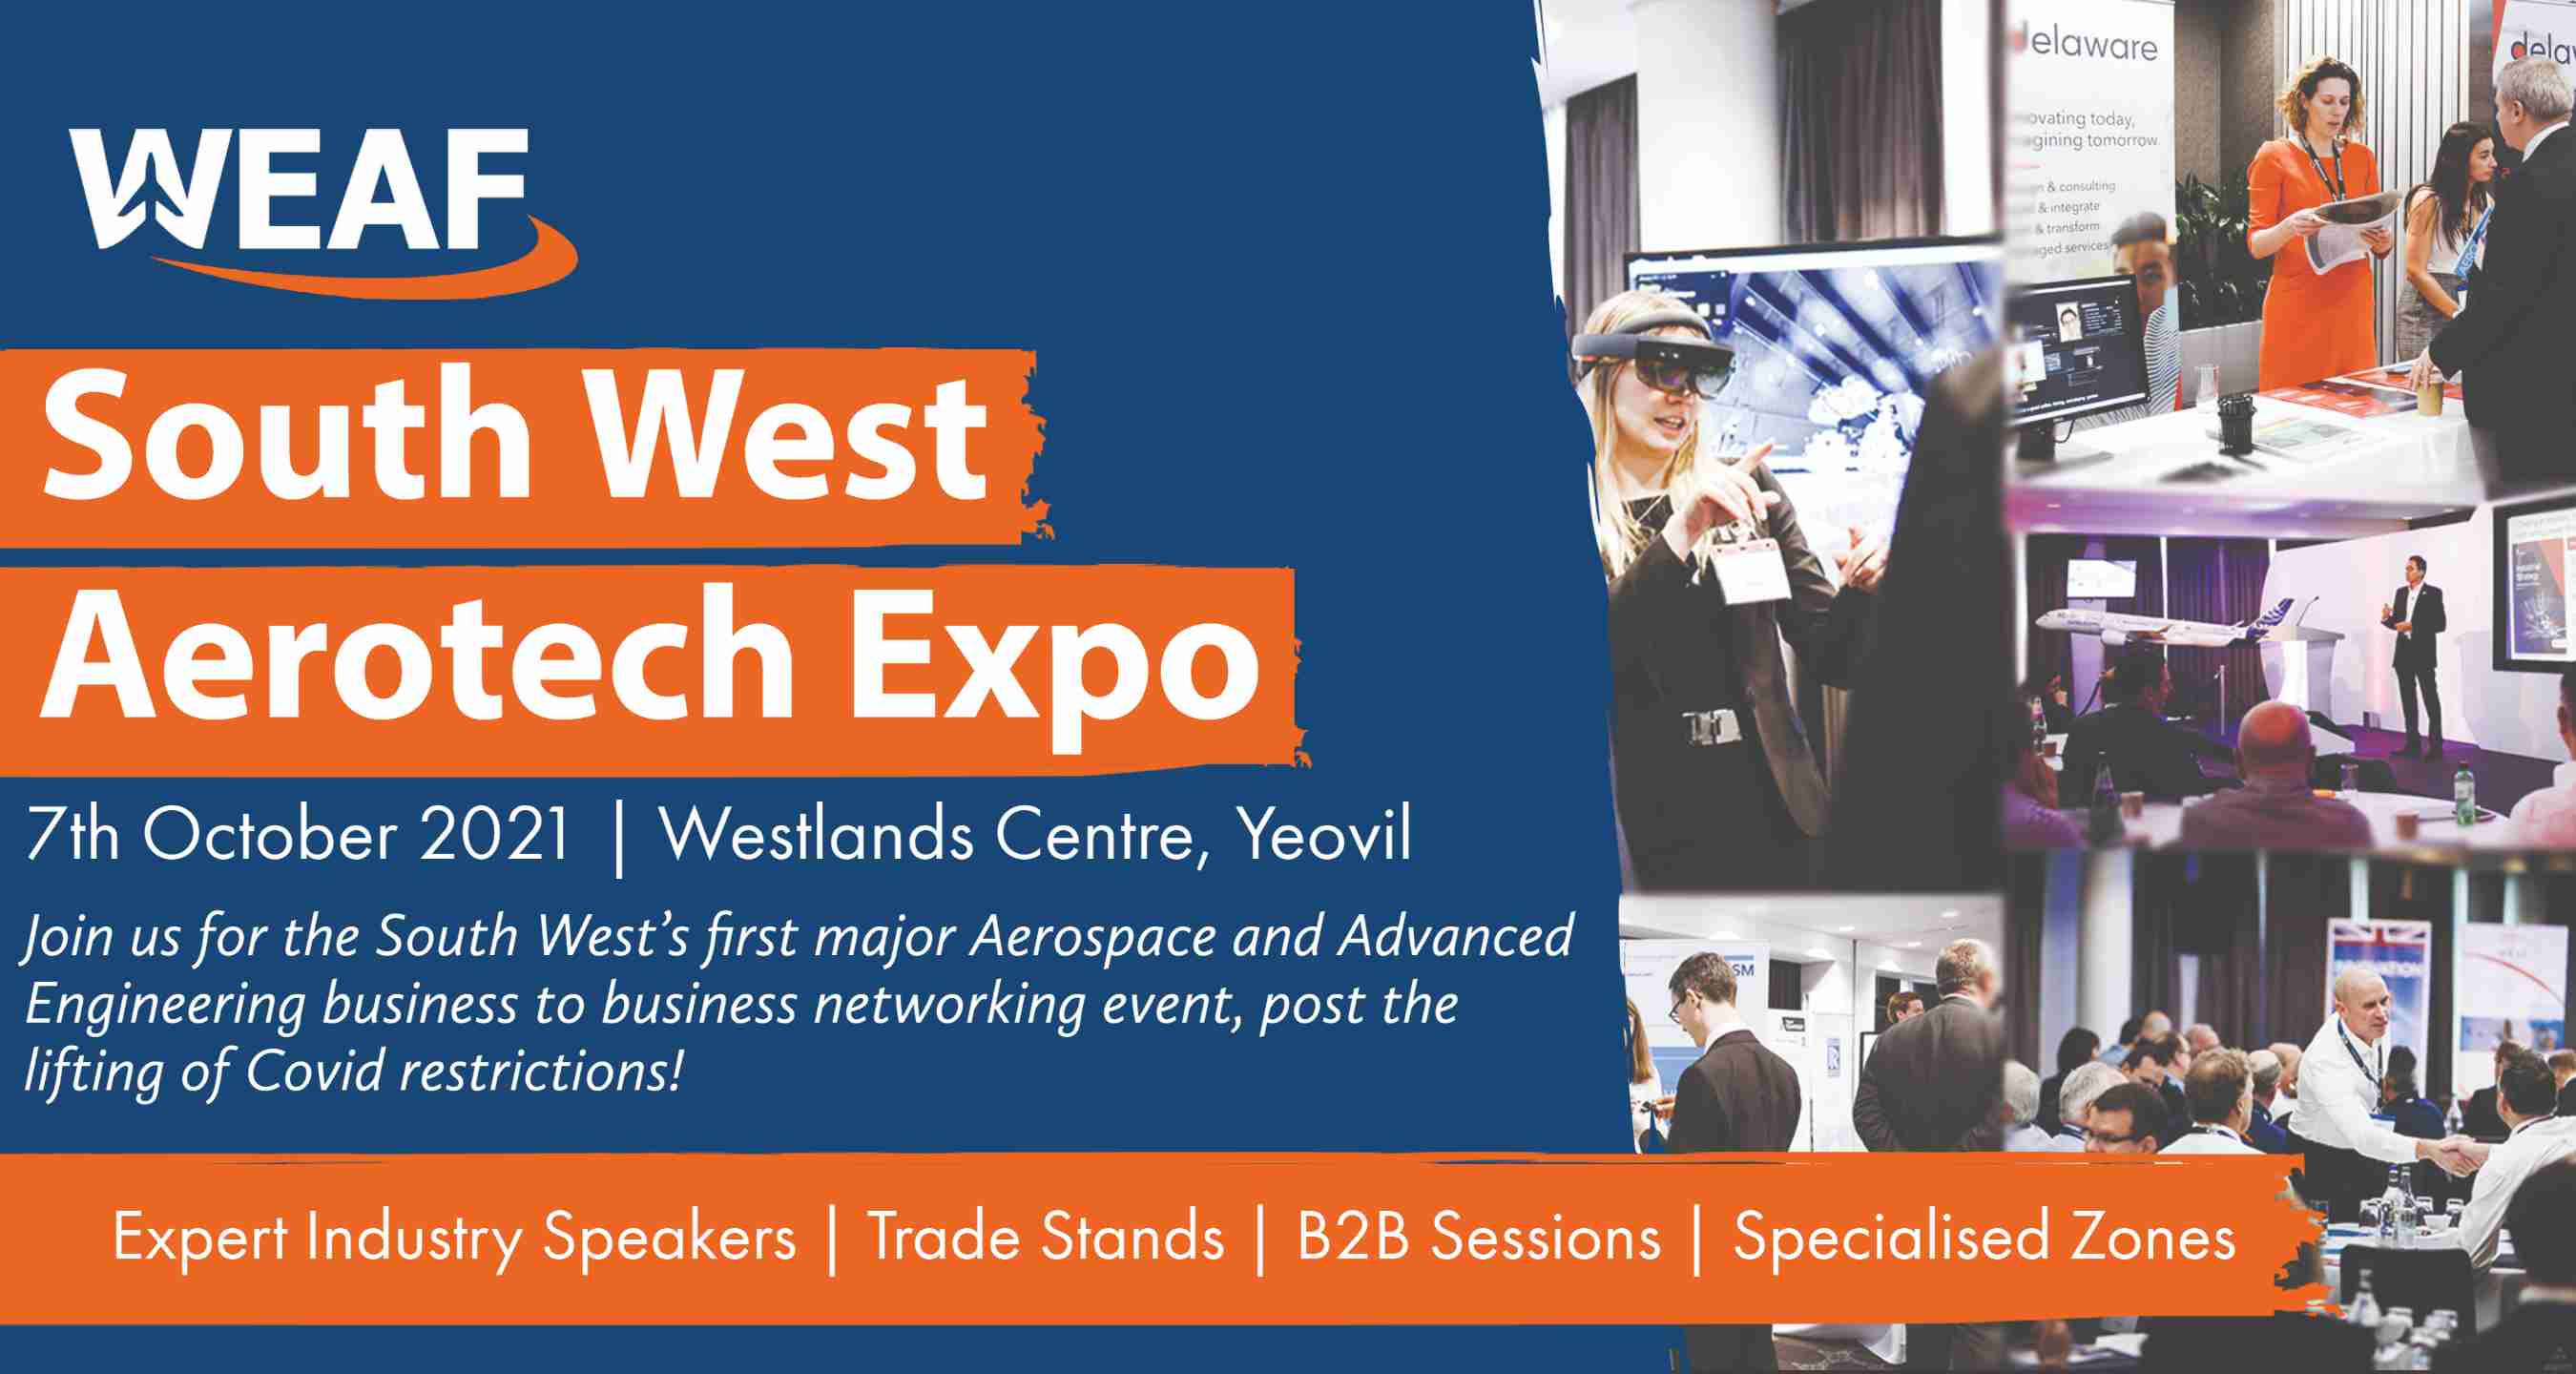 WEAF will highlight opportunities in emerging sustainable technologies by nurturing connections between SMEs and OEMs